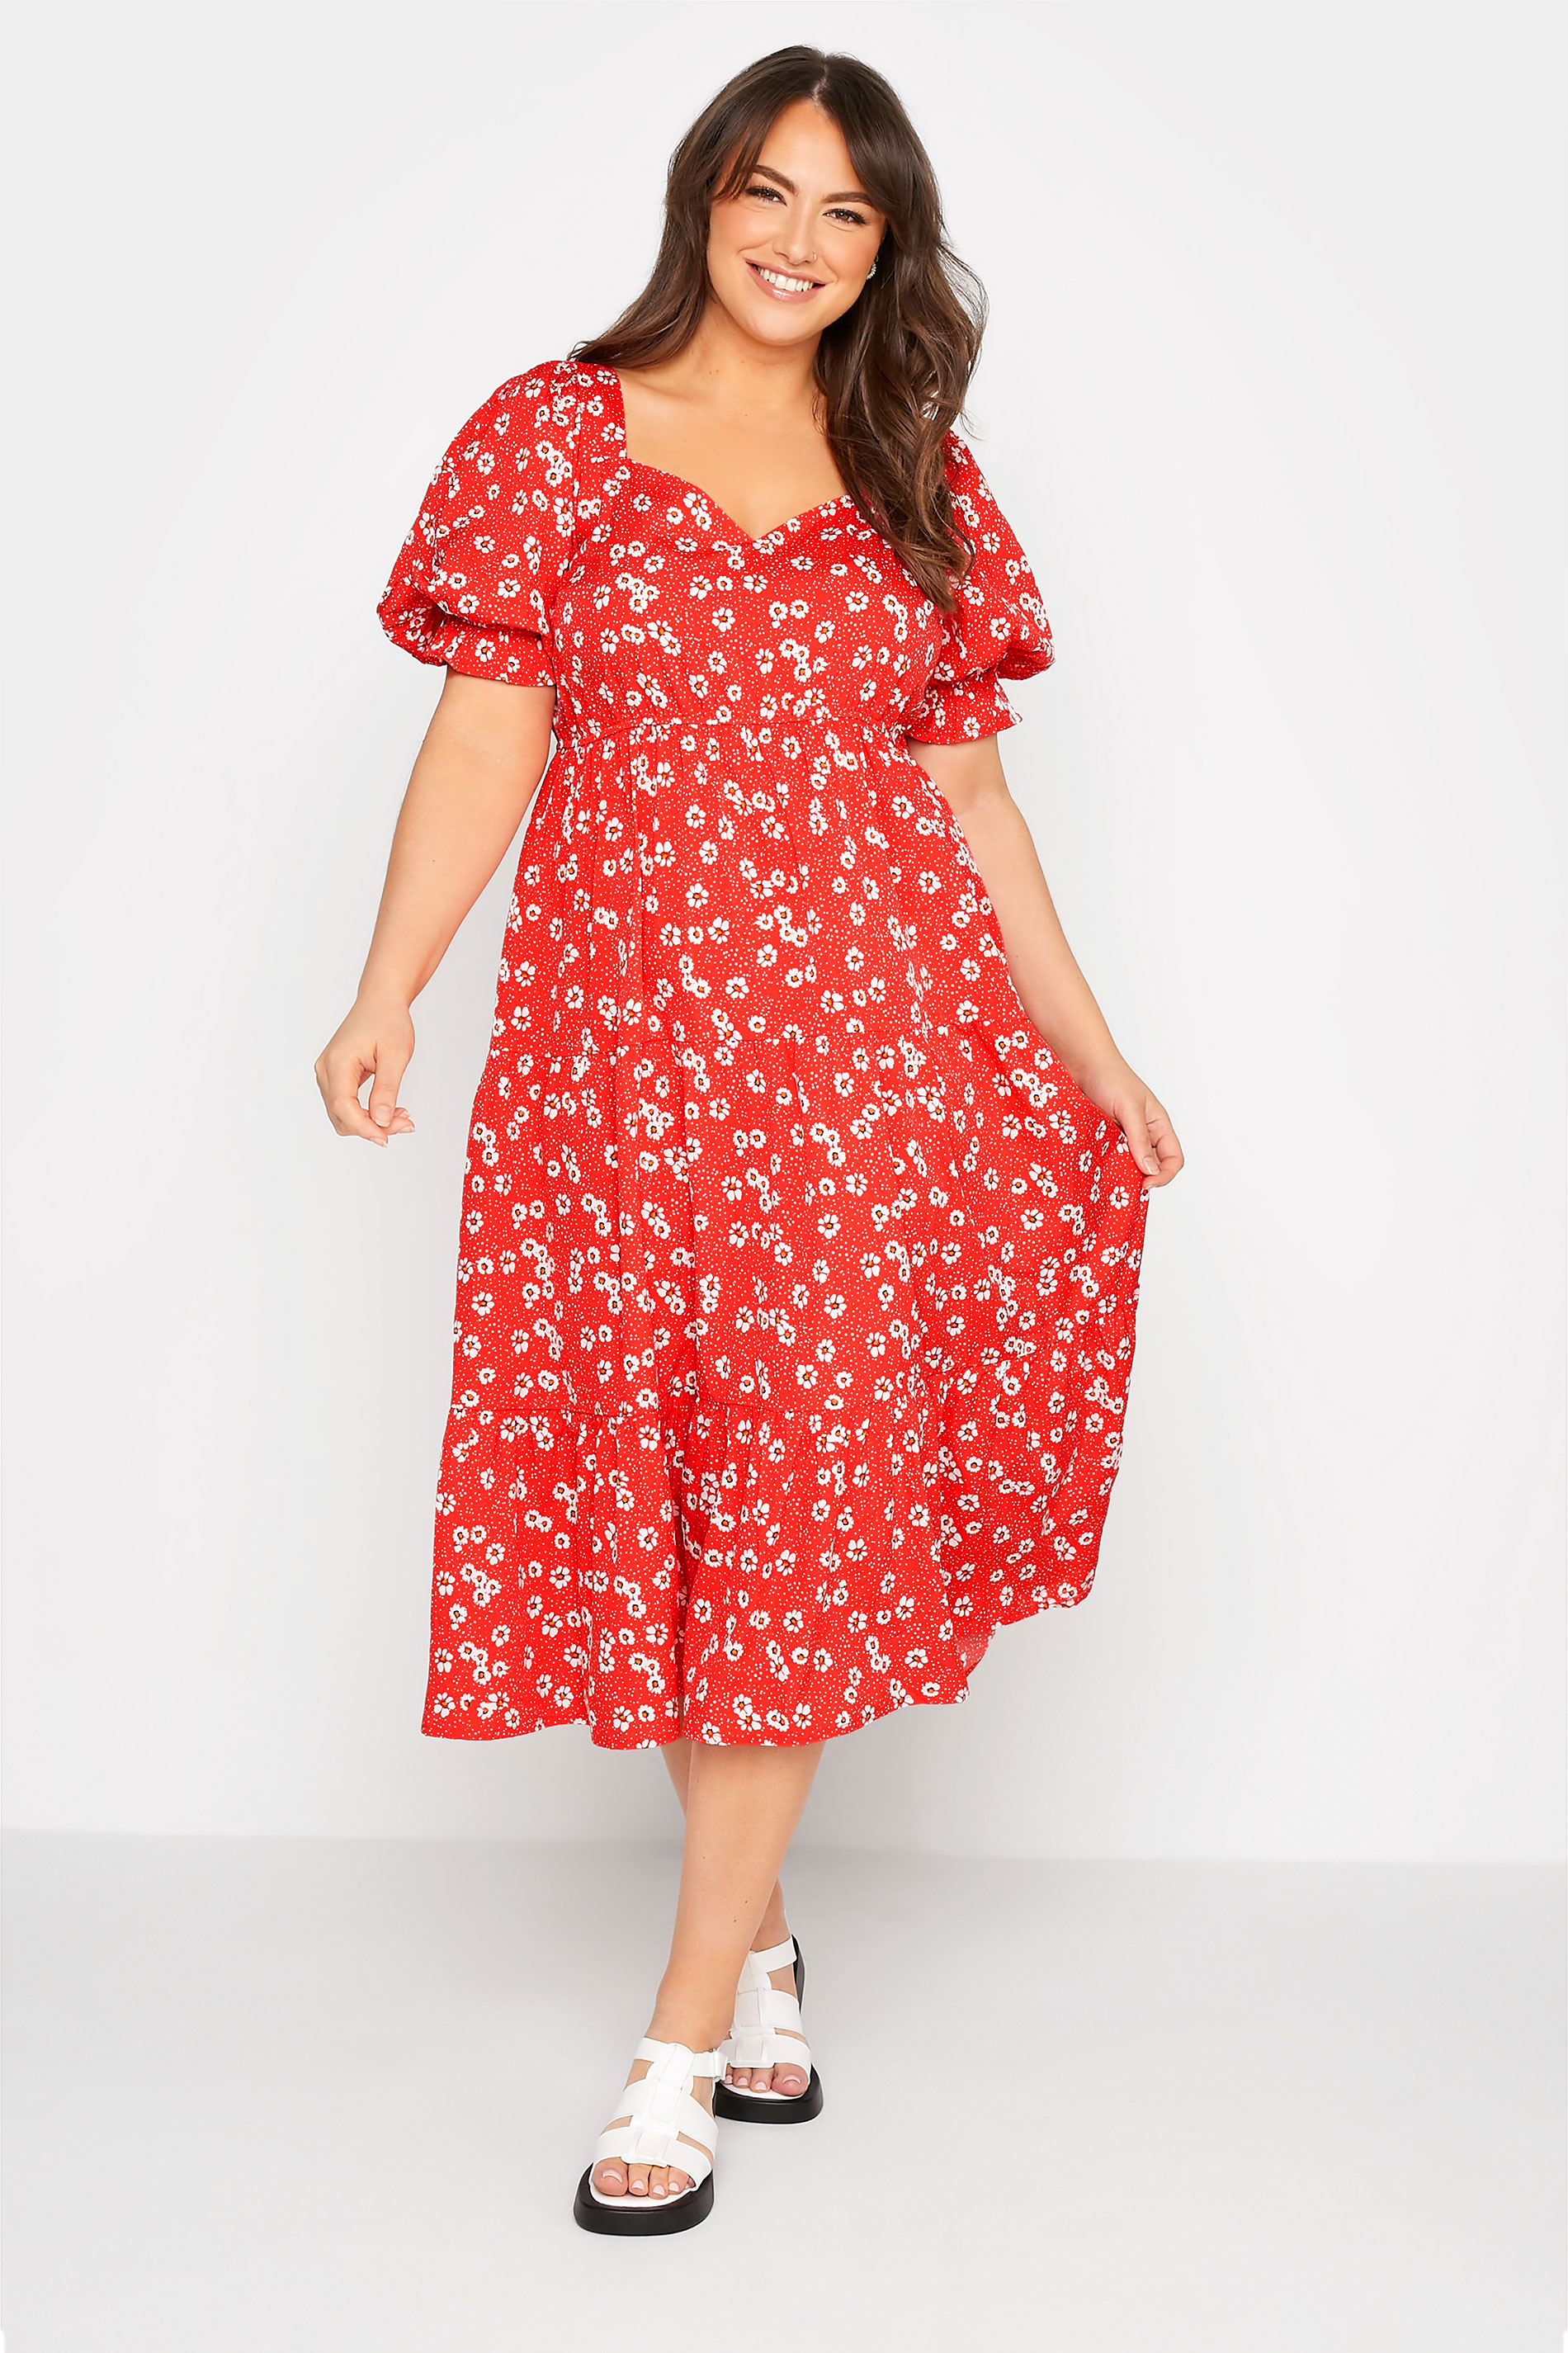 Robes Grande Taille Grande taille  Robes dÉté | LIMITED COLLECTION - Robe Rouge Floral Manches Courtes Bouffantes - WV58662